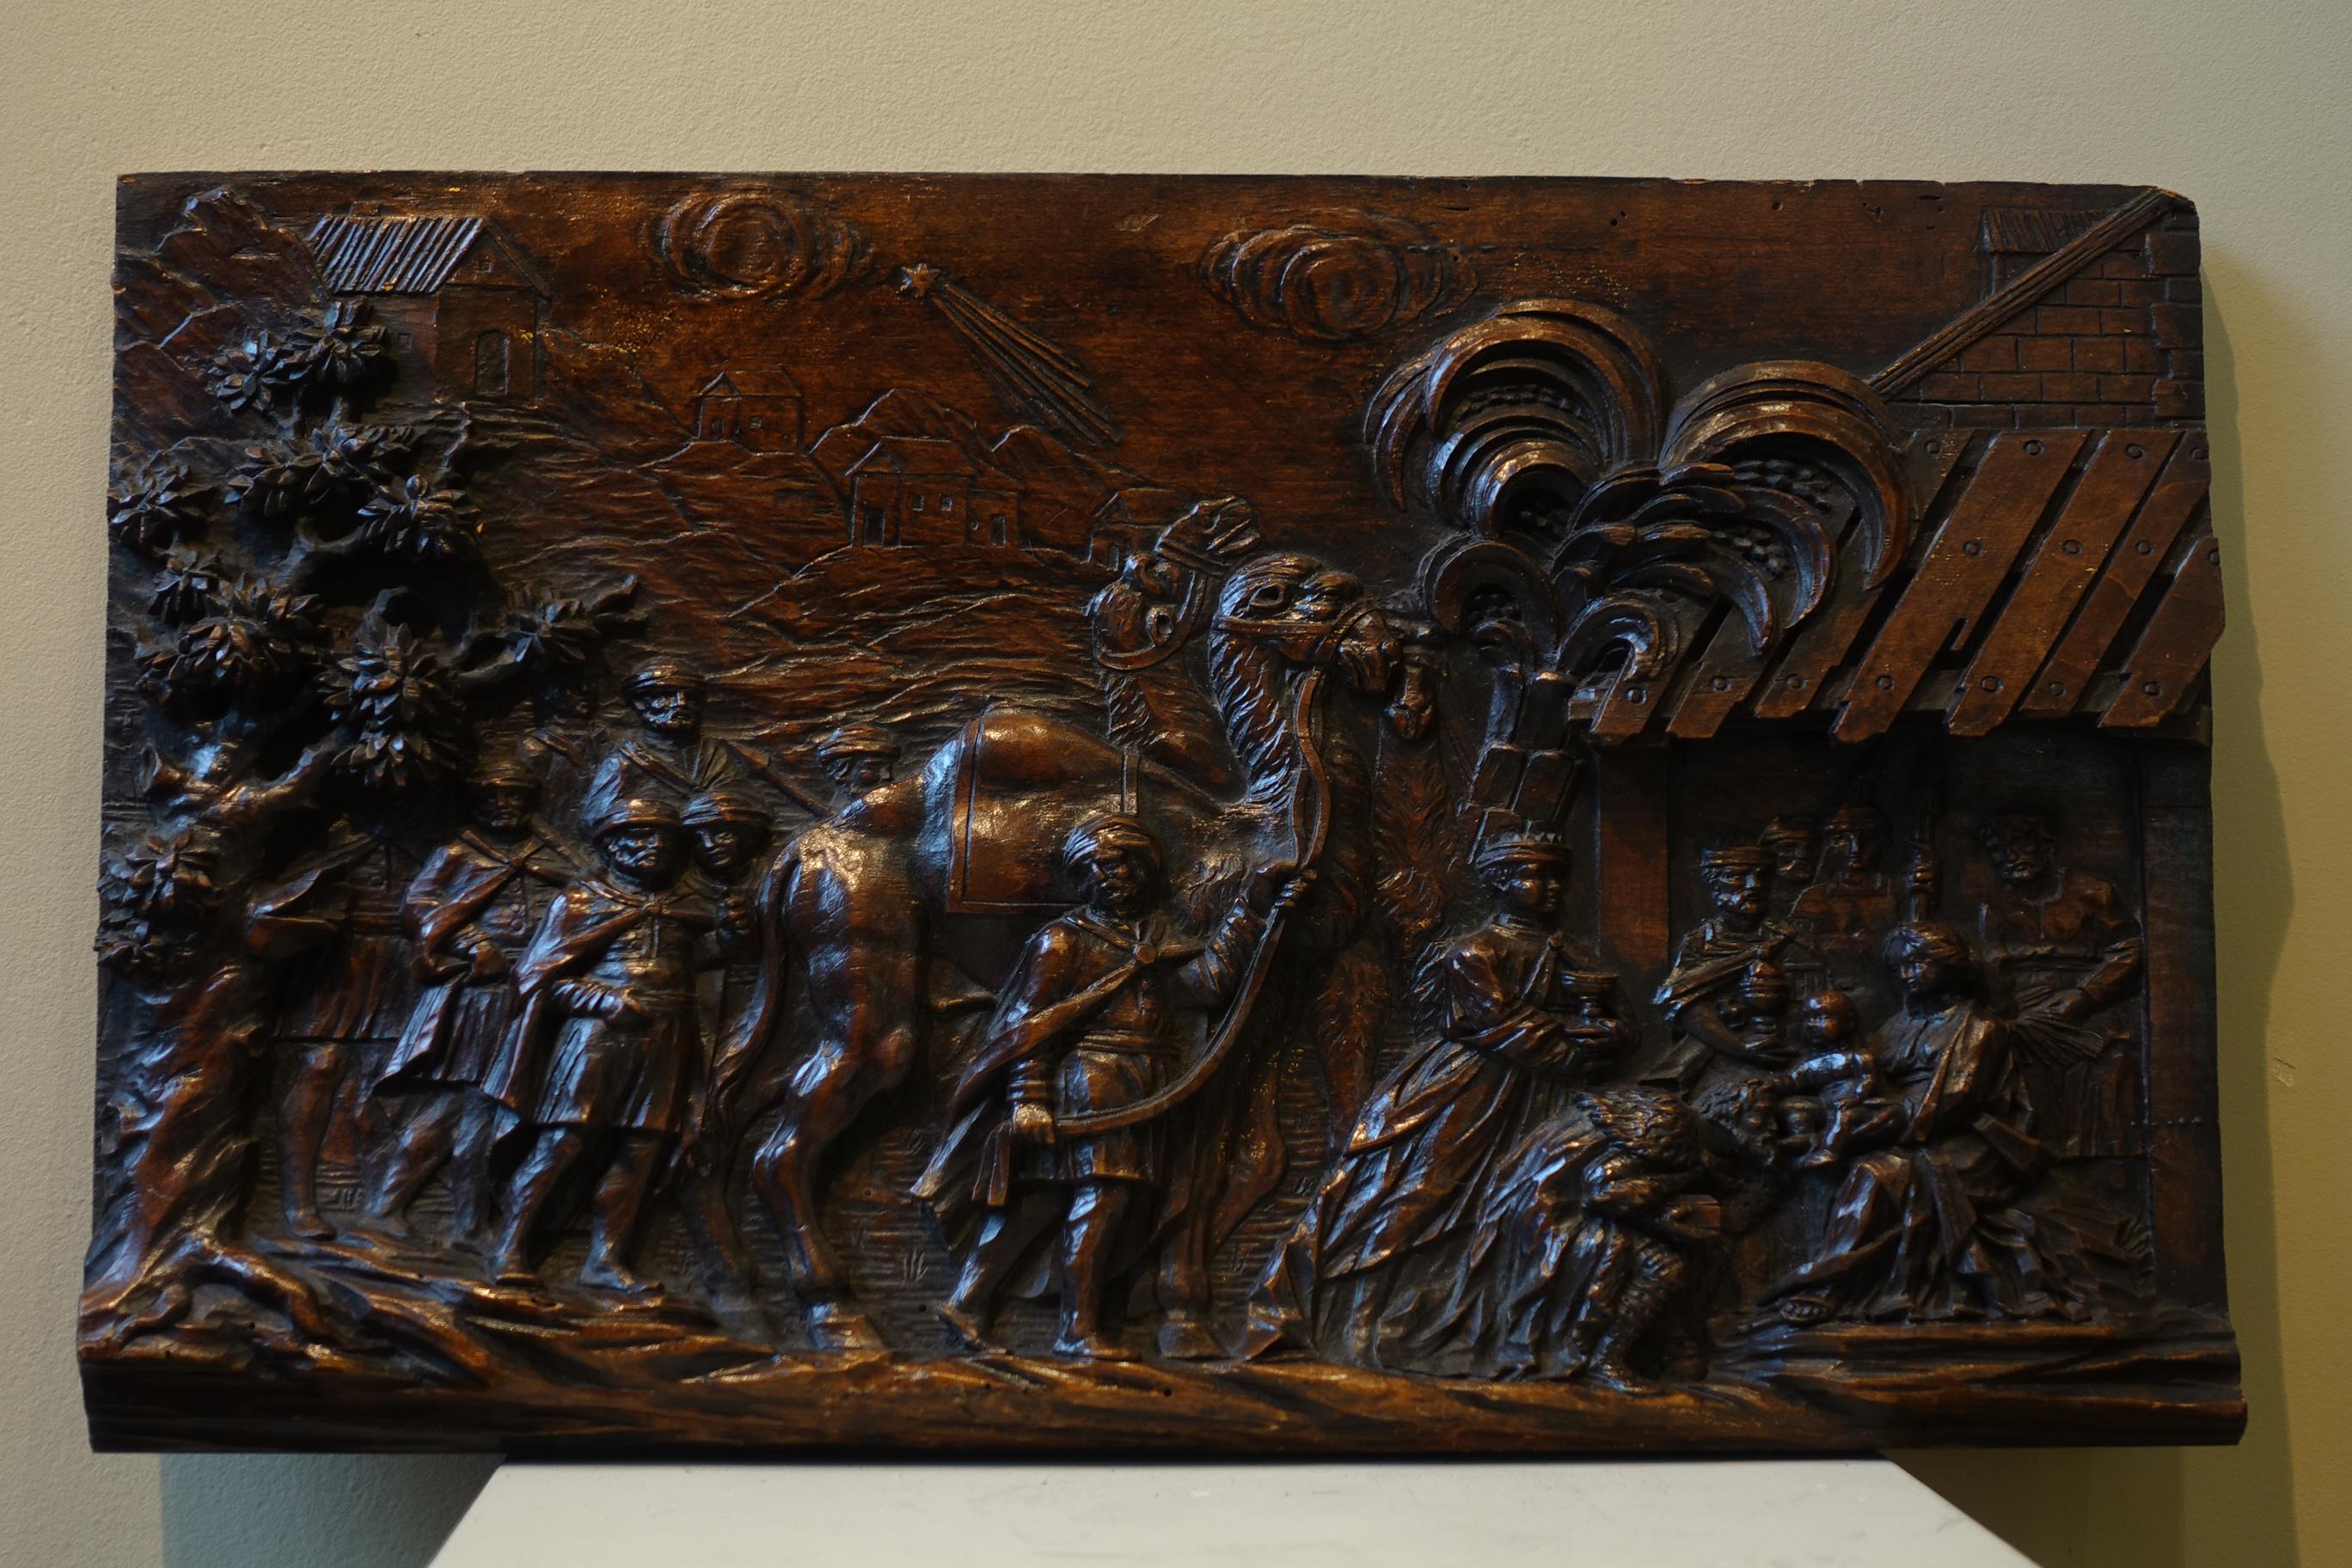 The Adoration of the Magi.
Panel carved in high relief.
Flanders, 17th century.
Measures: 53 x 32,5 cm.